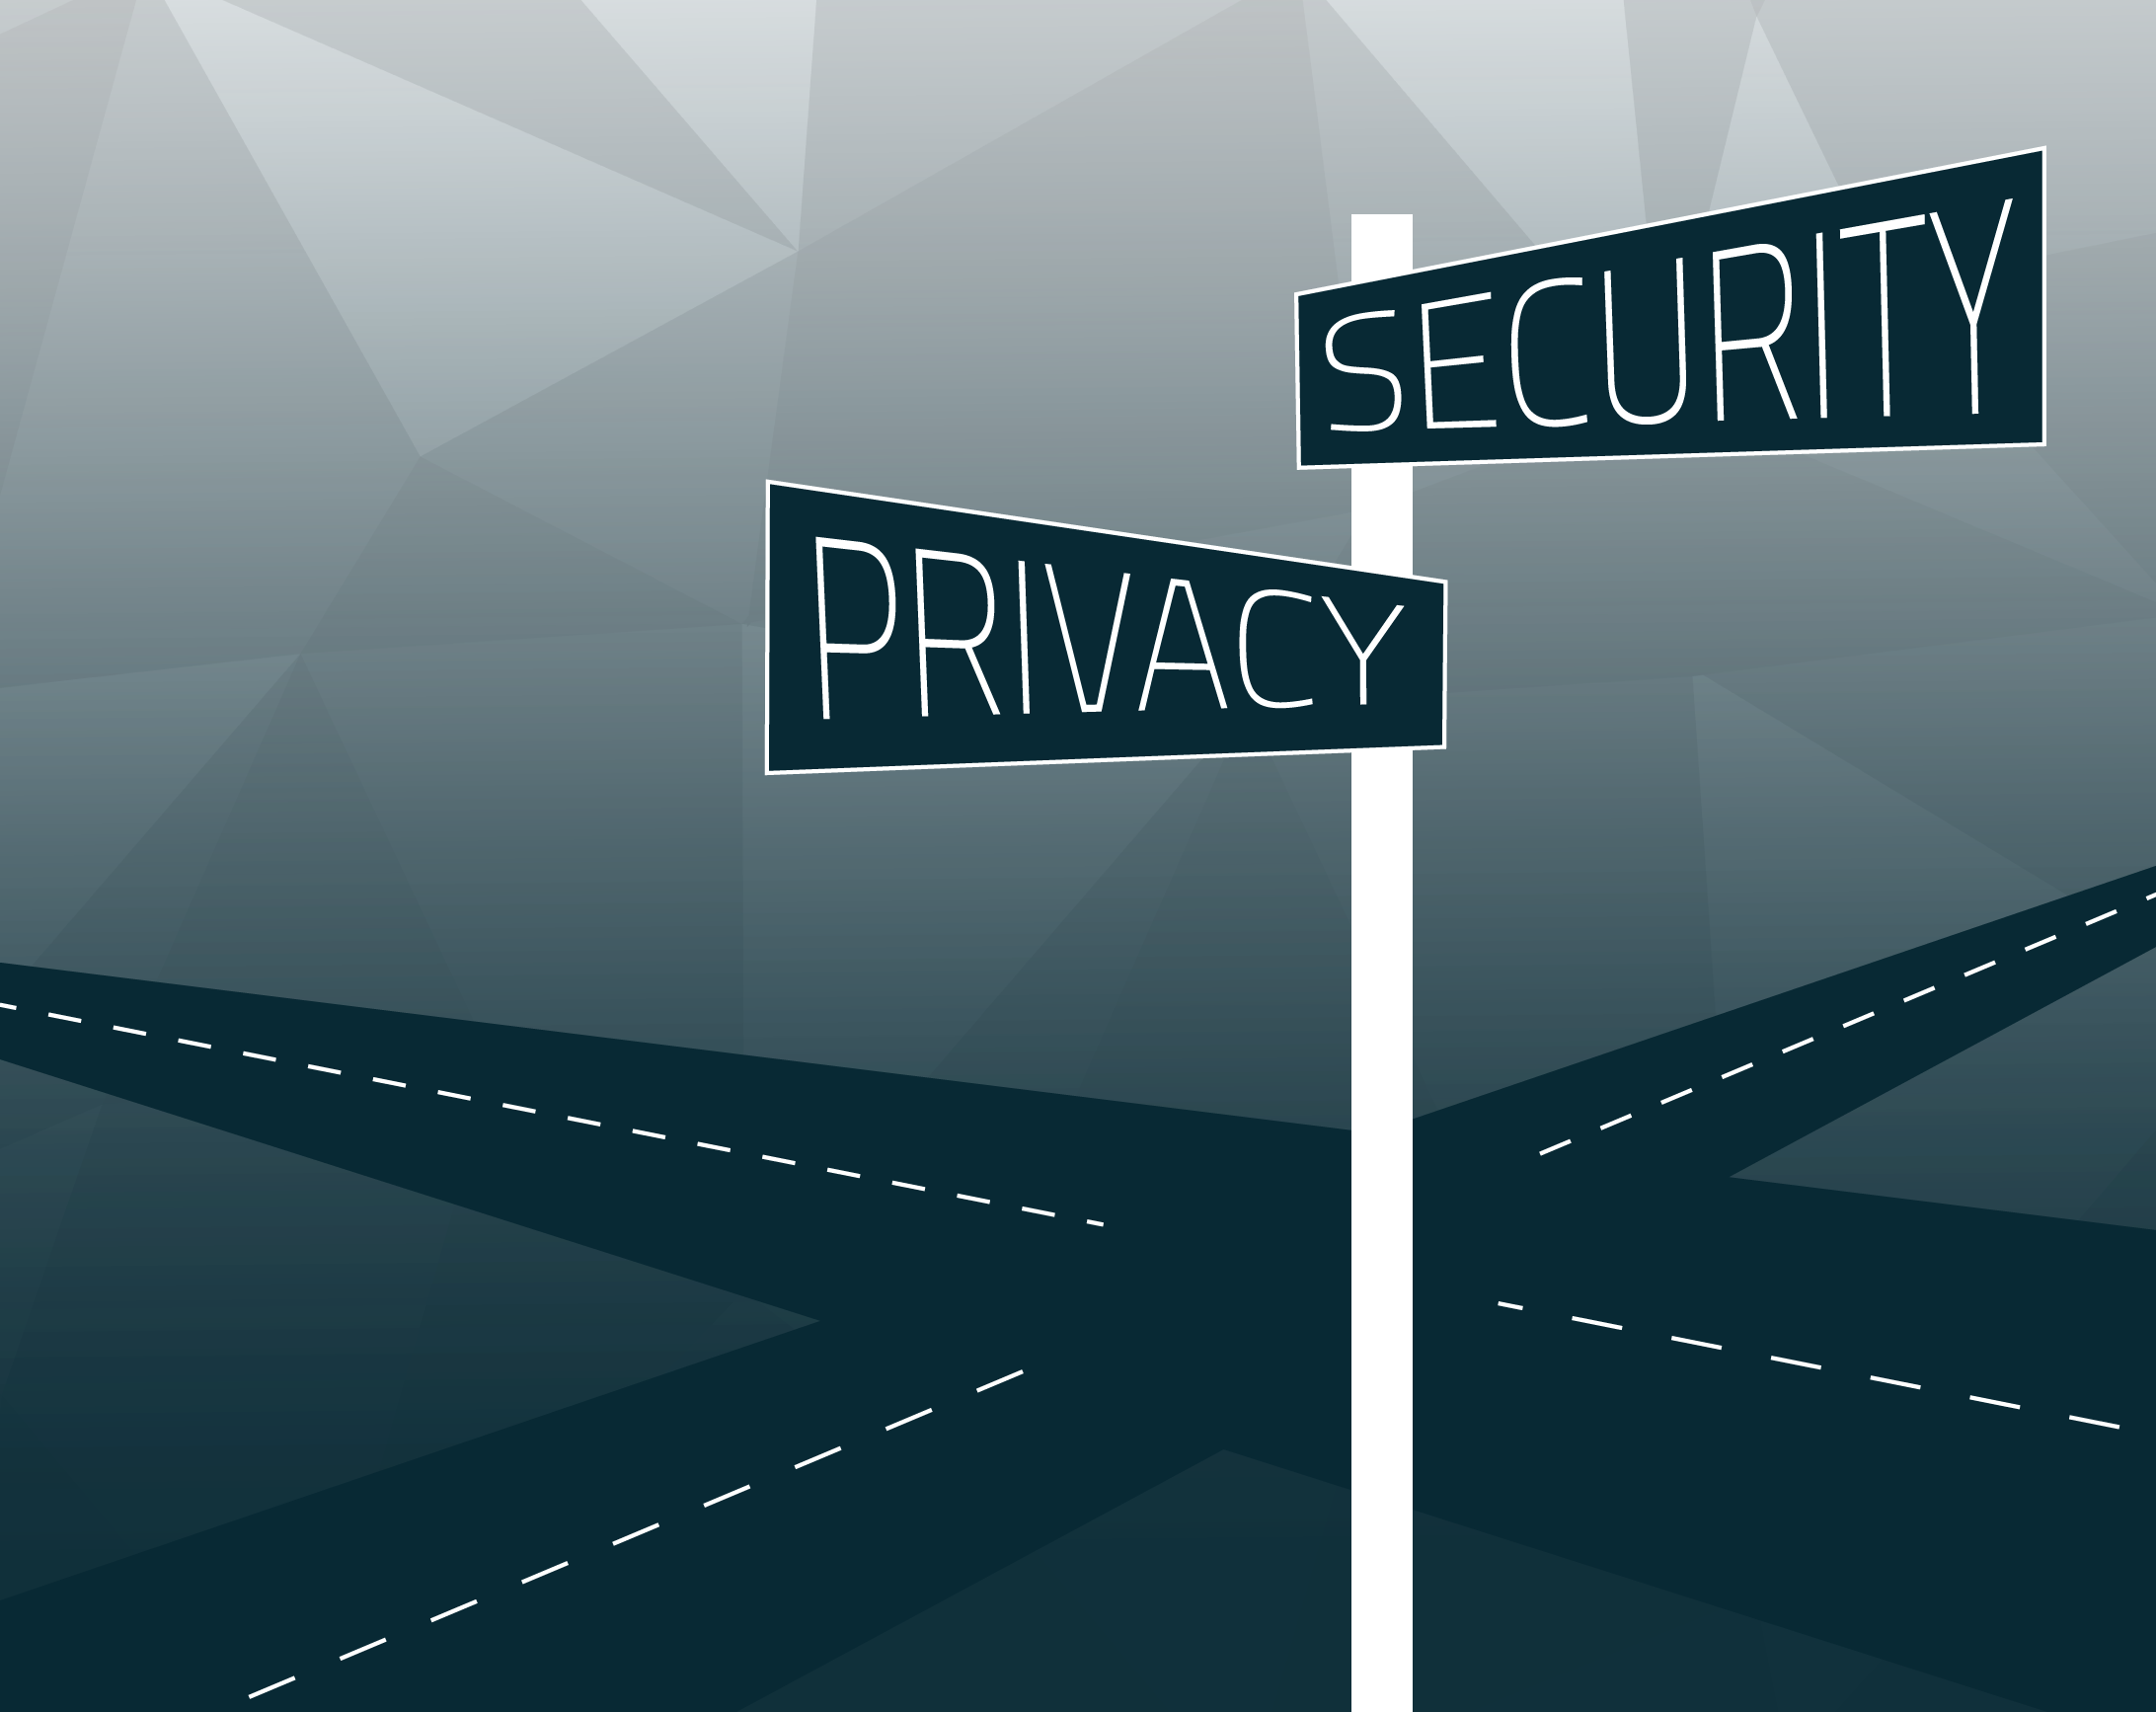 Where Privacy and Security Intersect